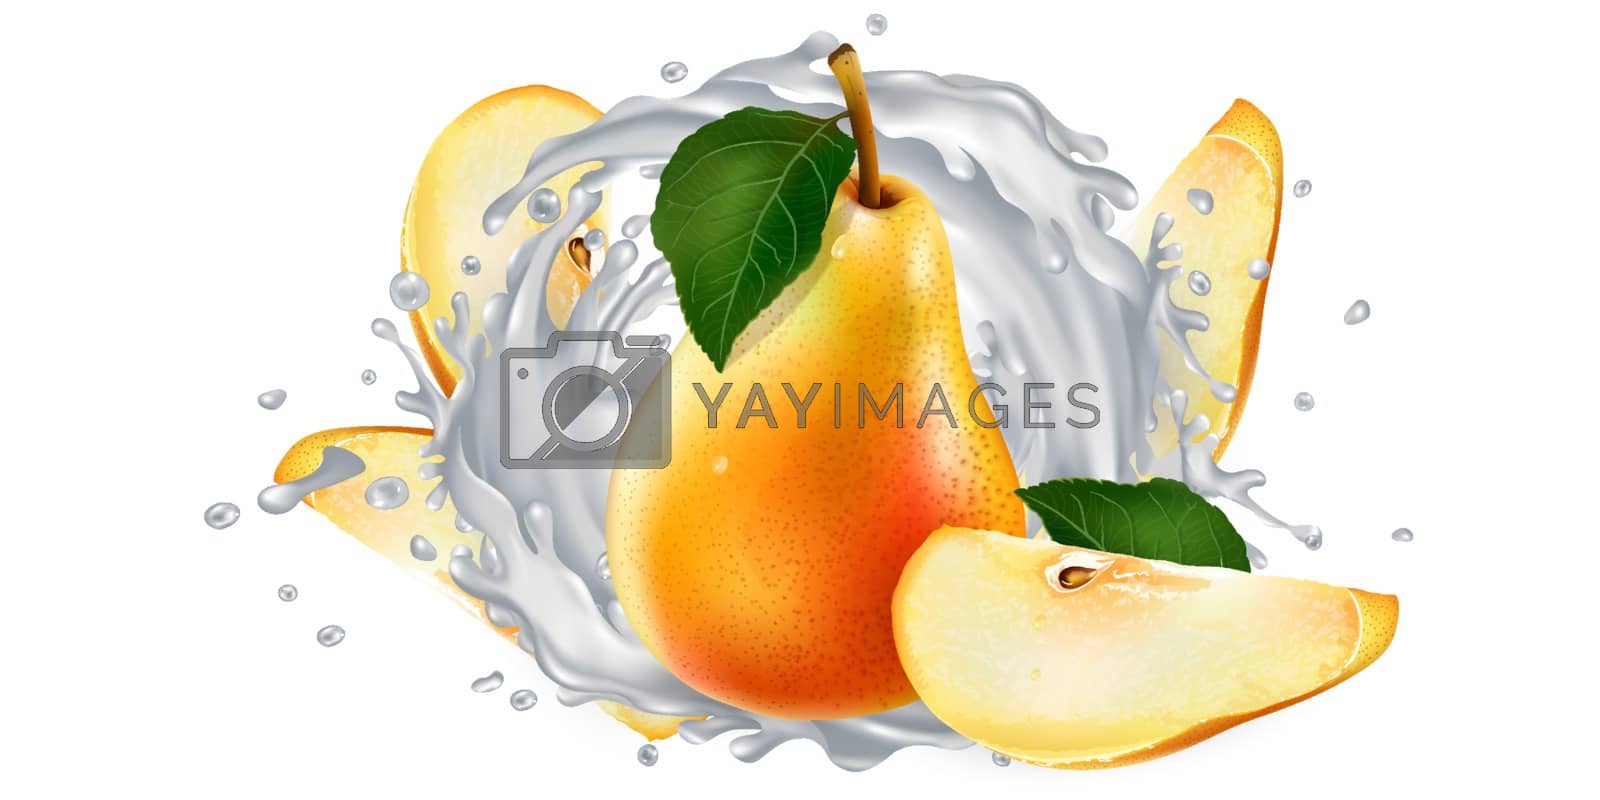 Royalty free image of Pears and a splash of milk or yogurt. by ConceptCafe